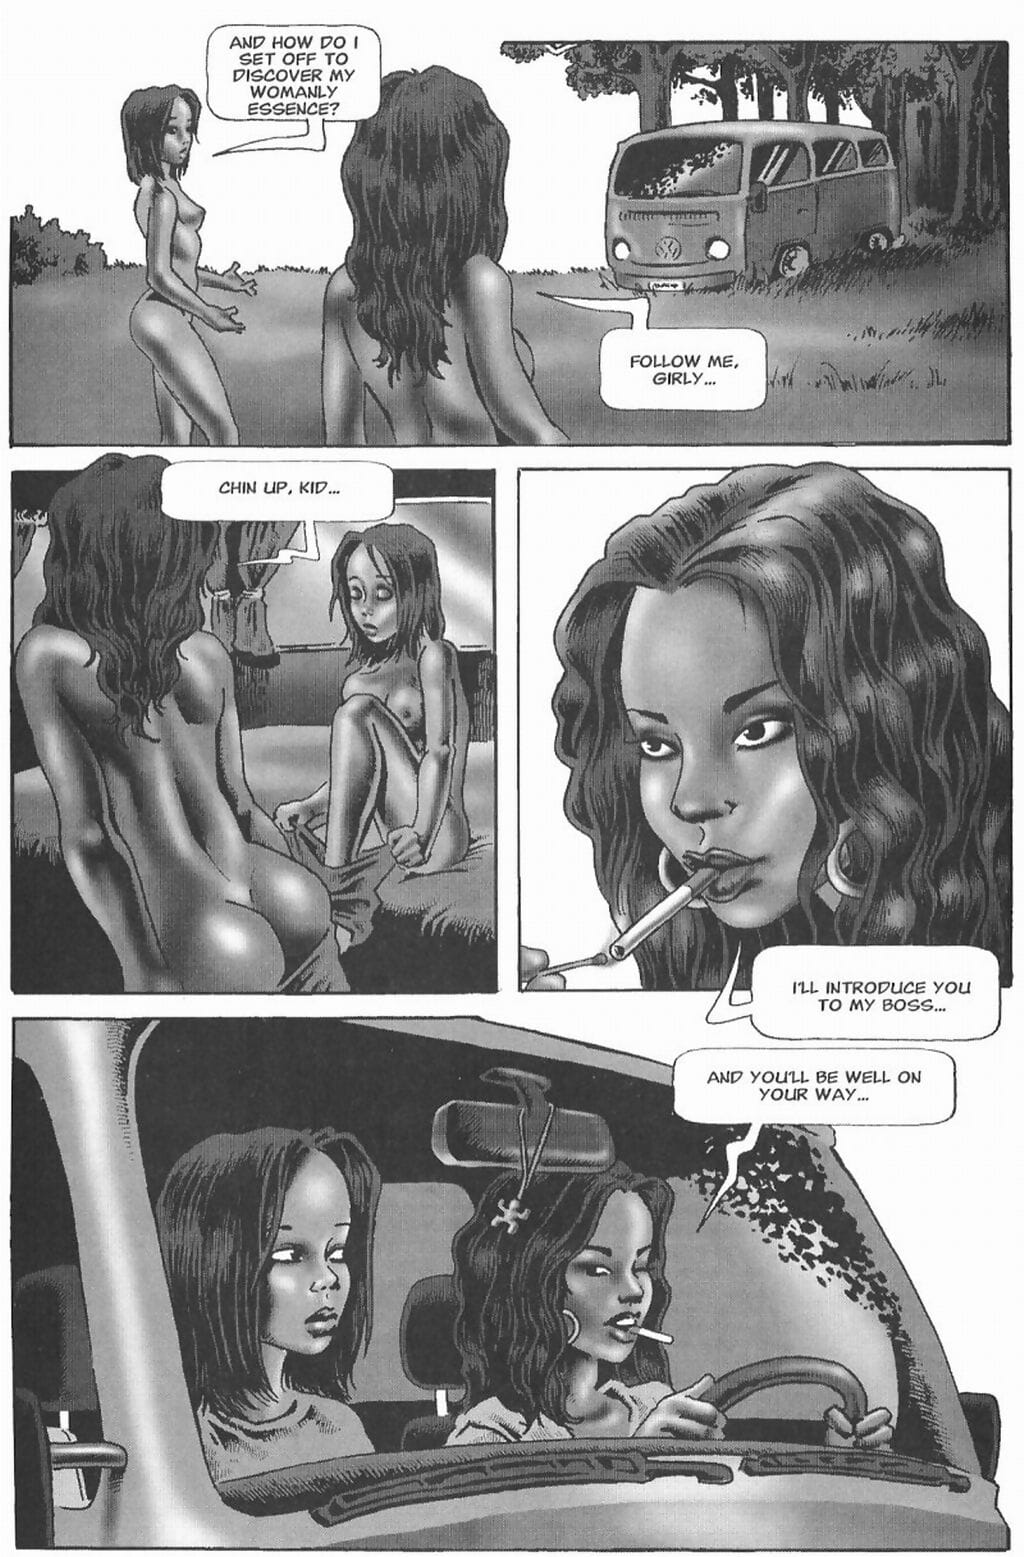 Alraune #3 page 1